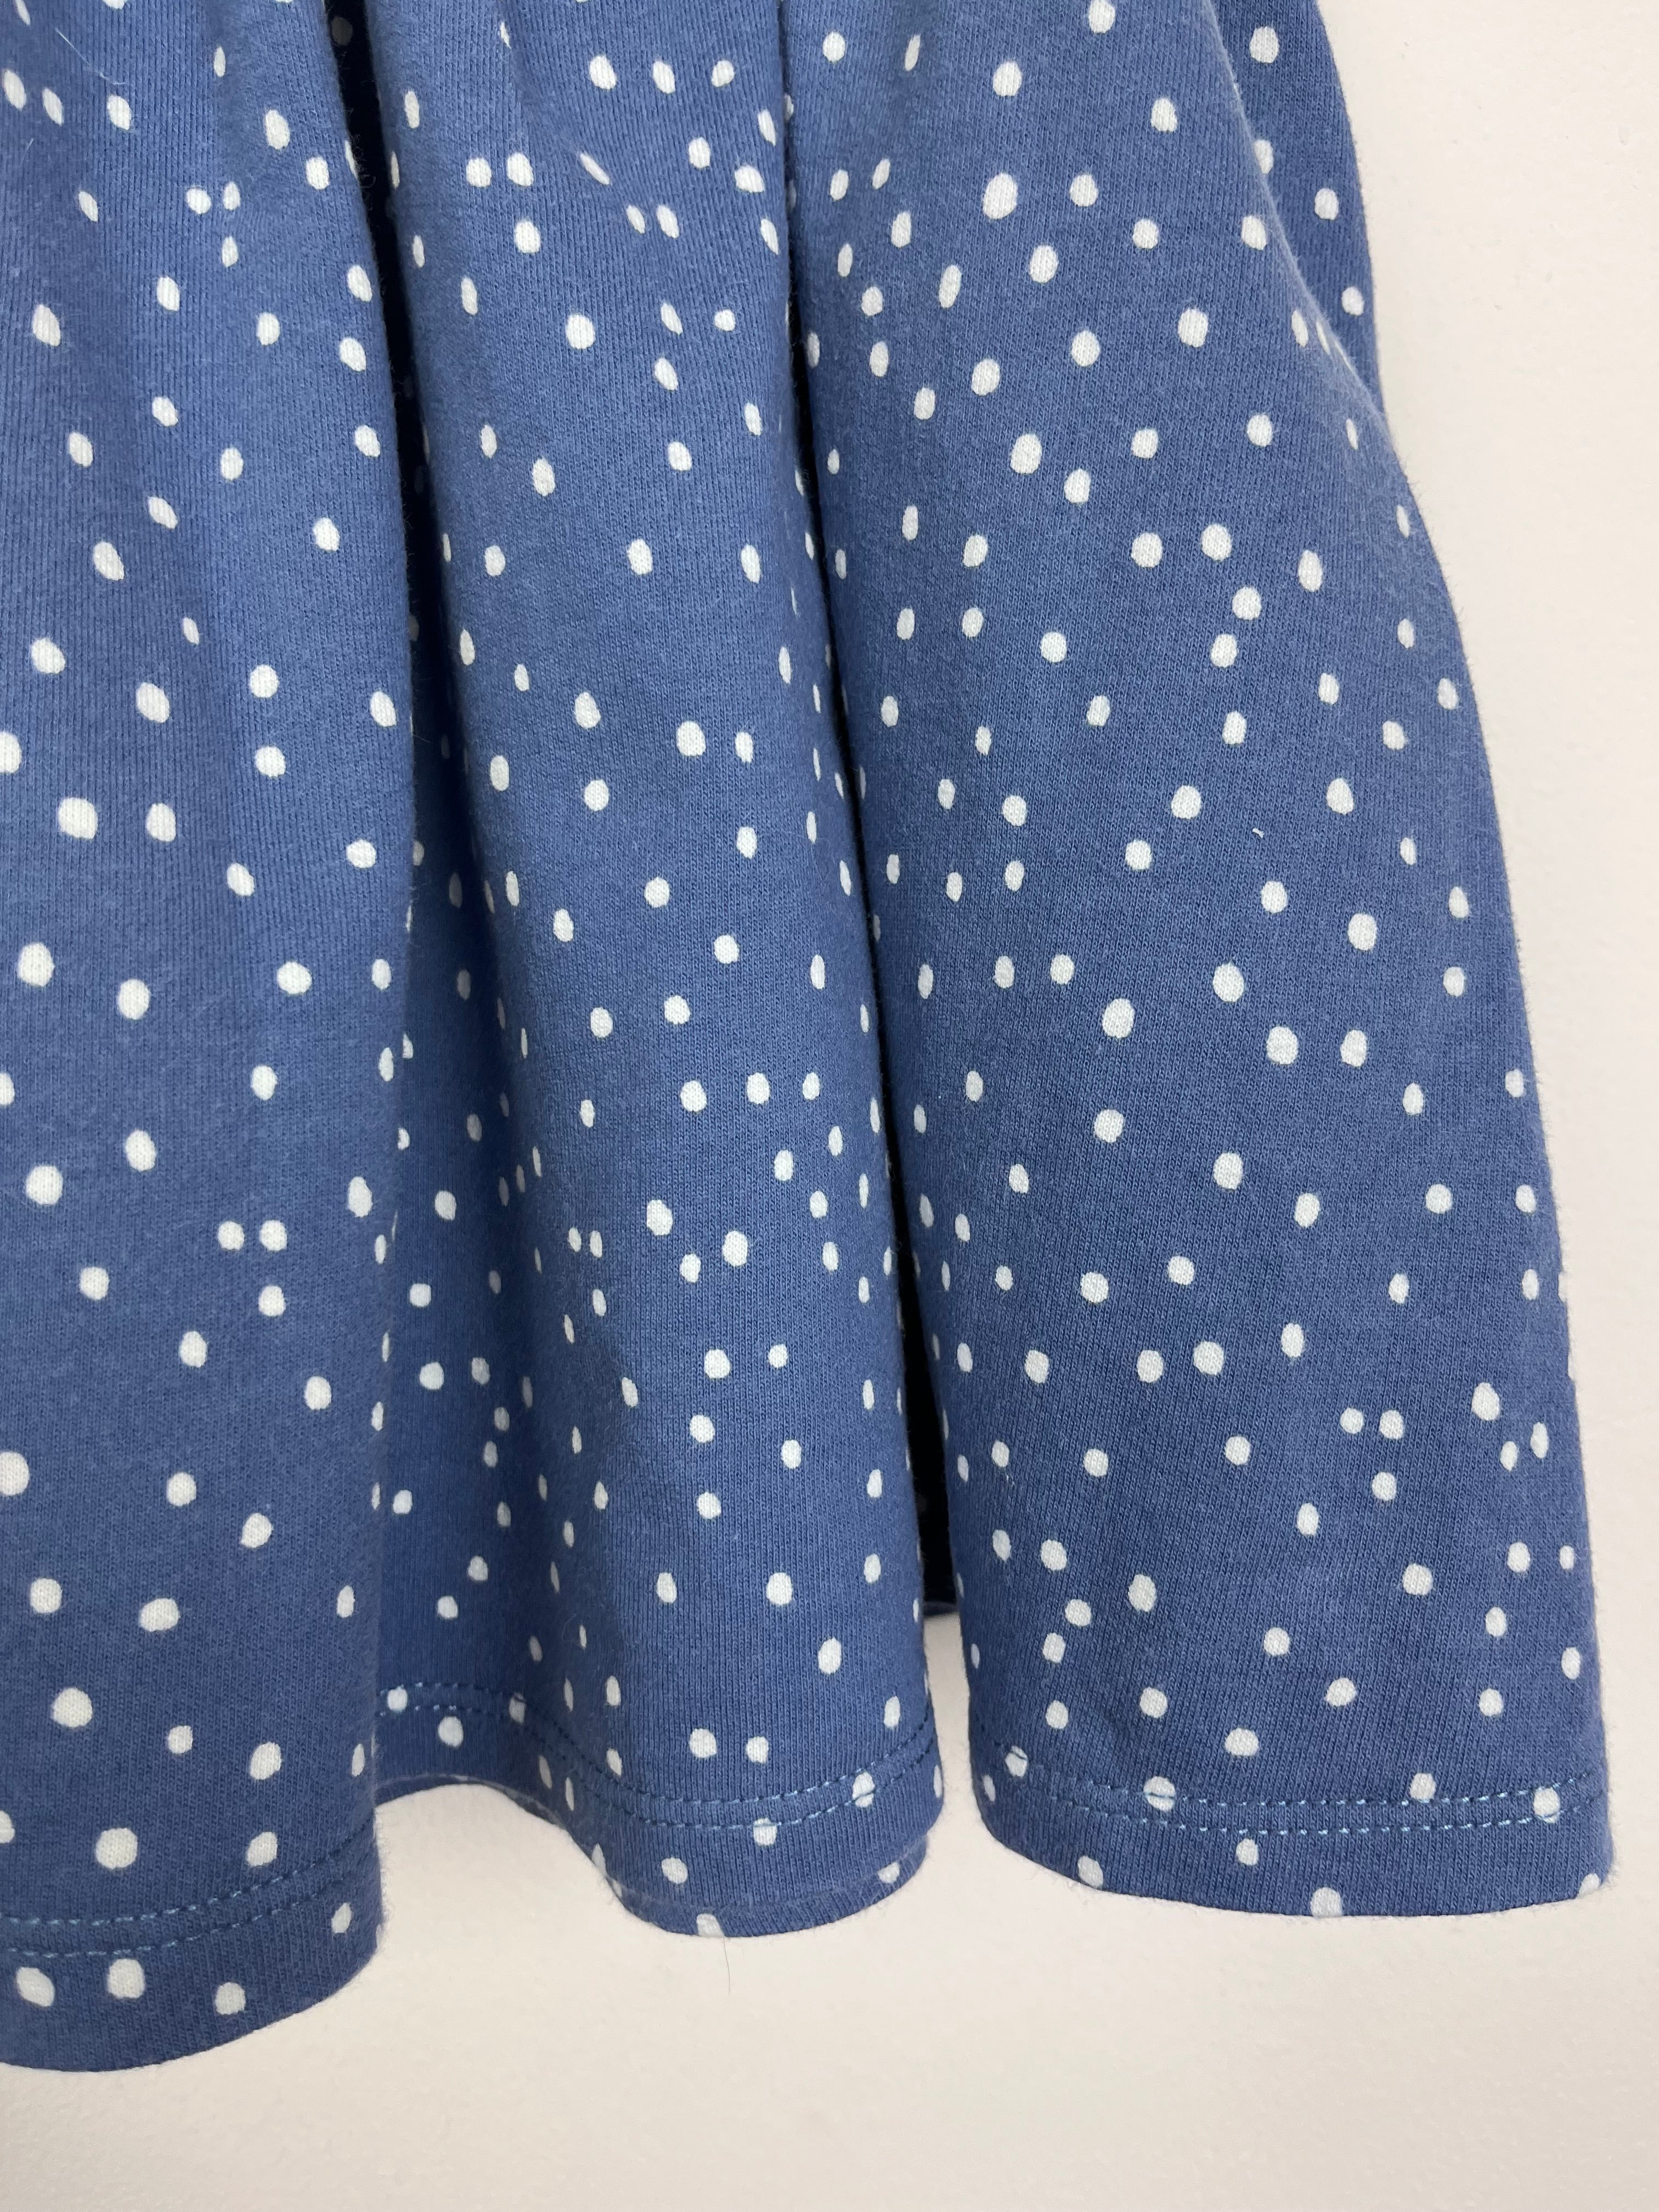 John Lewis 10 Years-Skirts-Second Snuggle Preloved